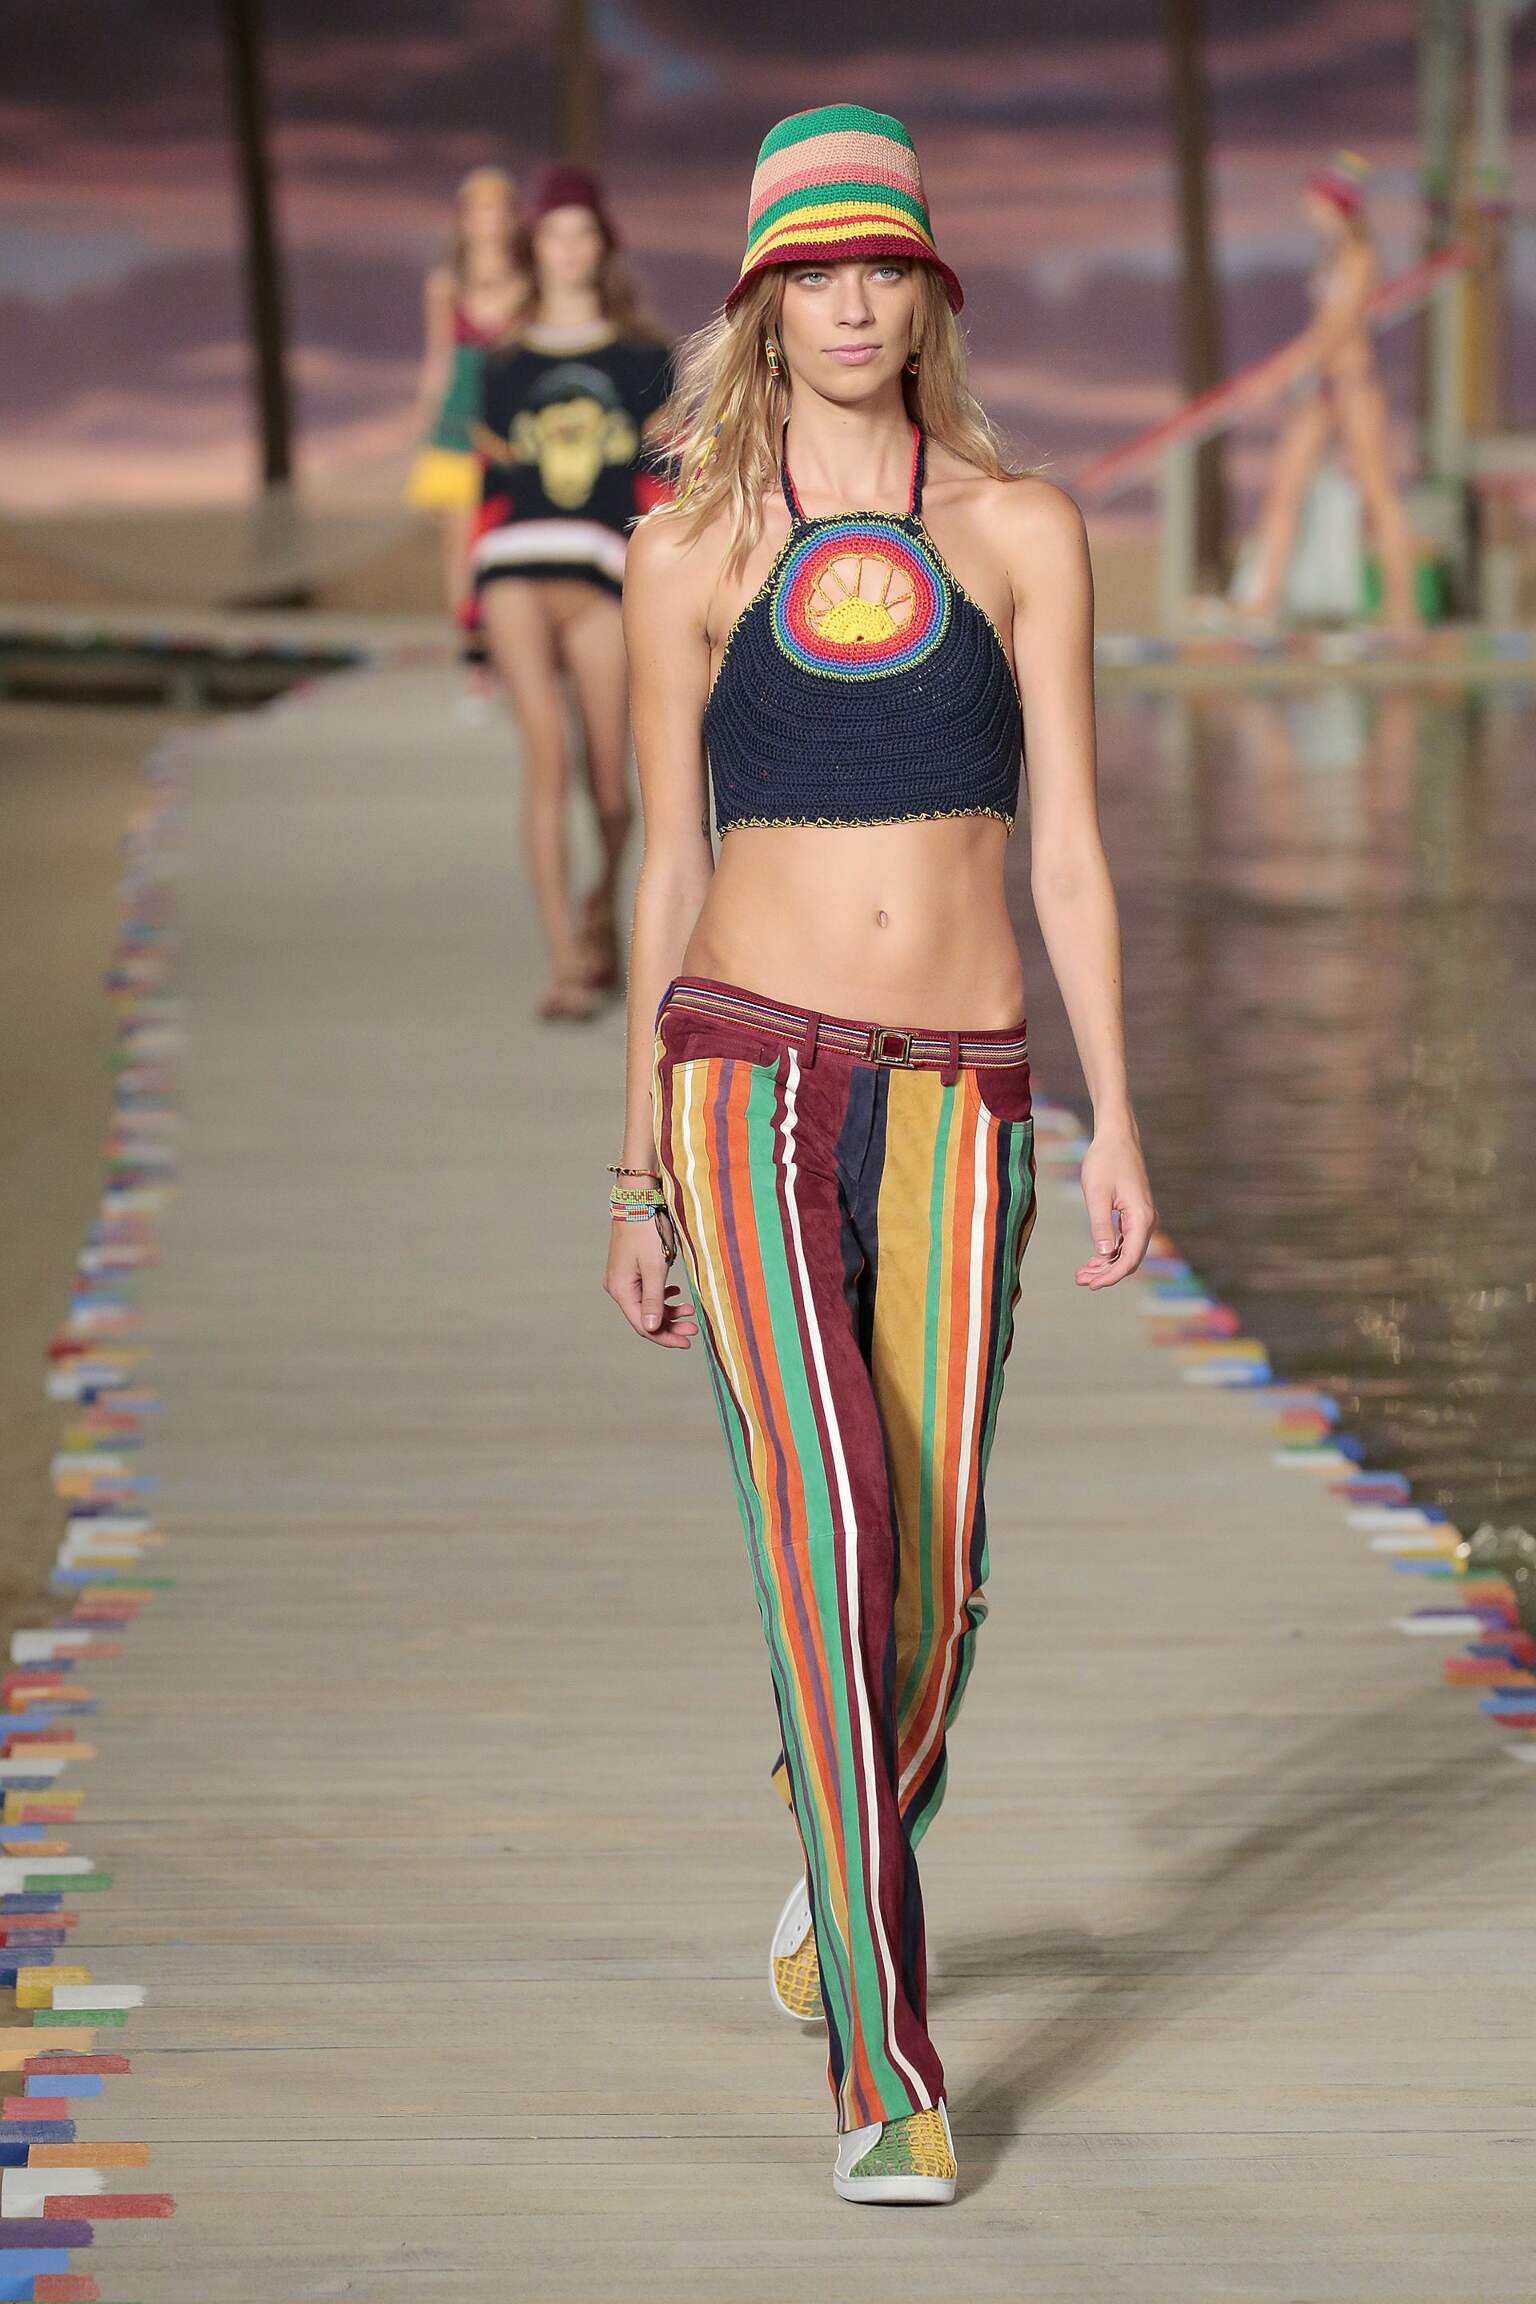 magnetron optocht markering TOMMY HILFIGER SPRING SUMMER 2016 WOMEN'S COLLECTION | The Skinny Beep